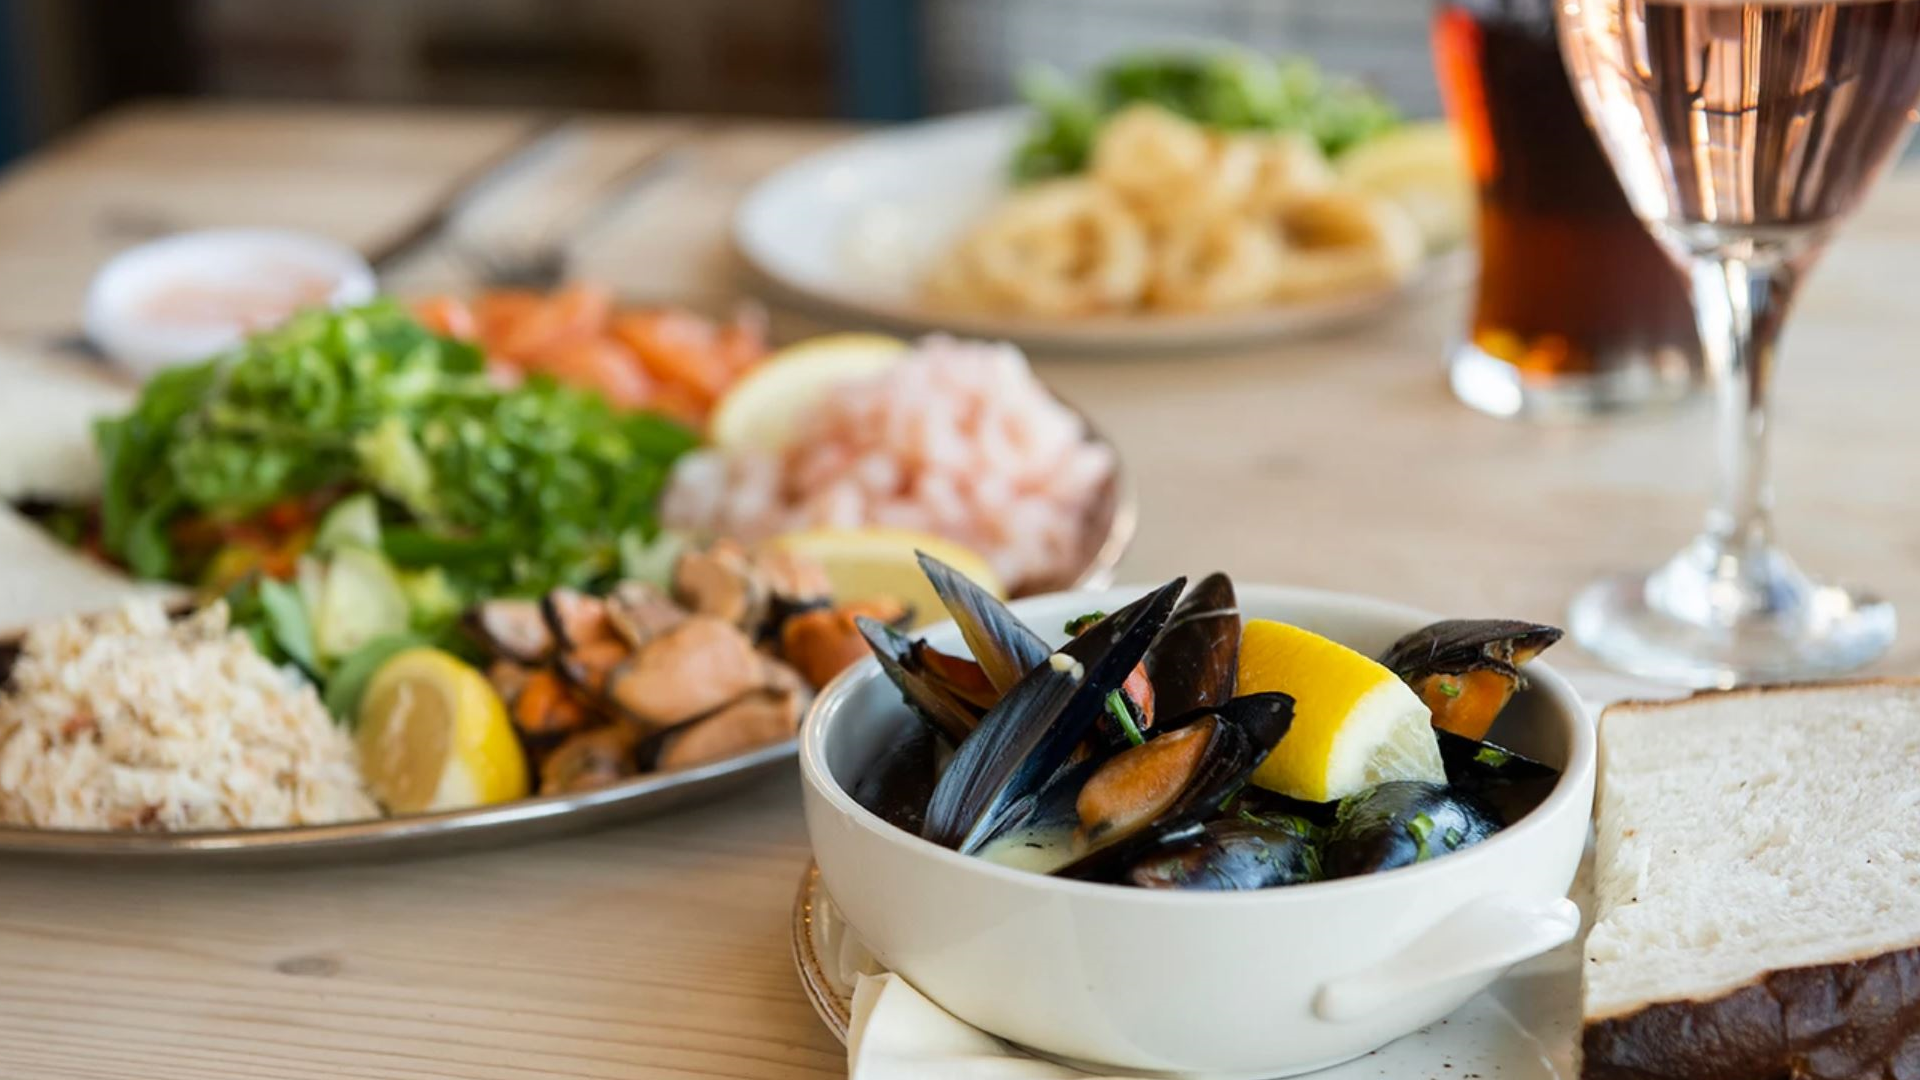 mussels with a platter containing crab, prawn and salad